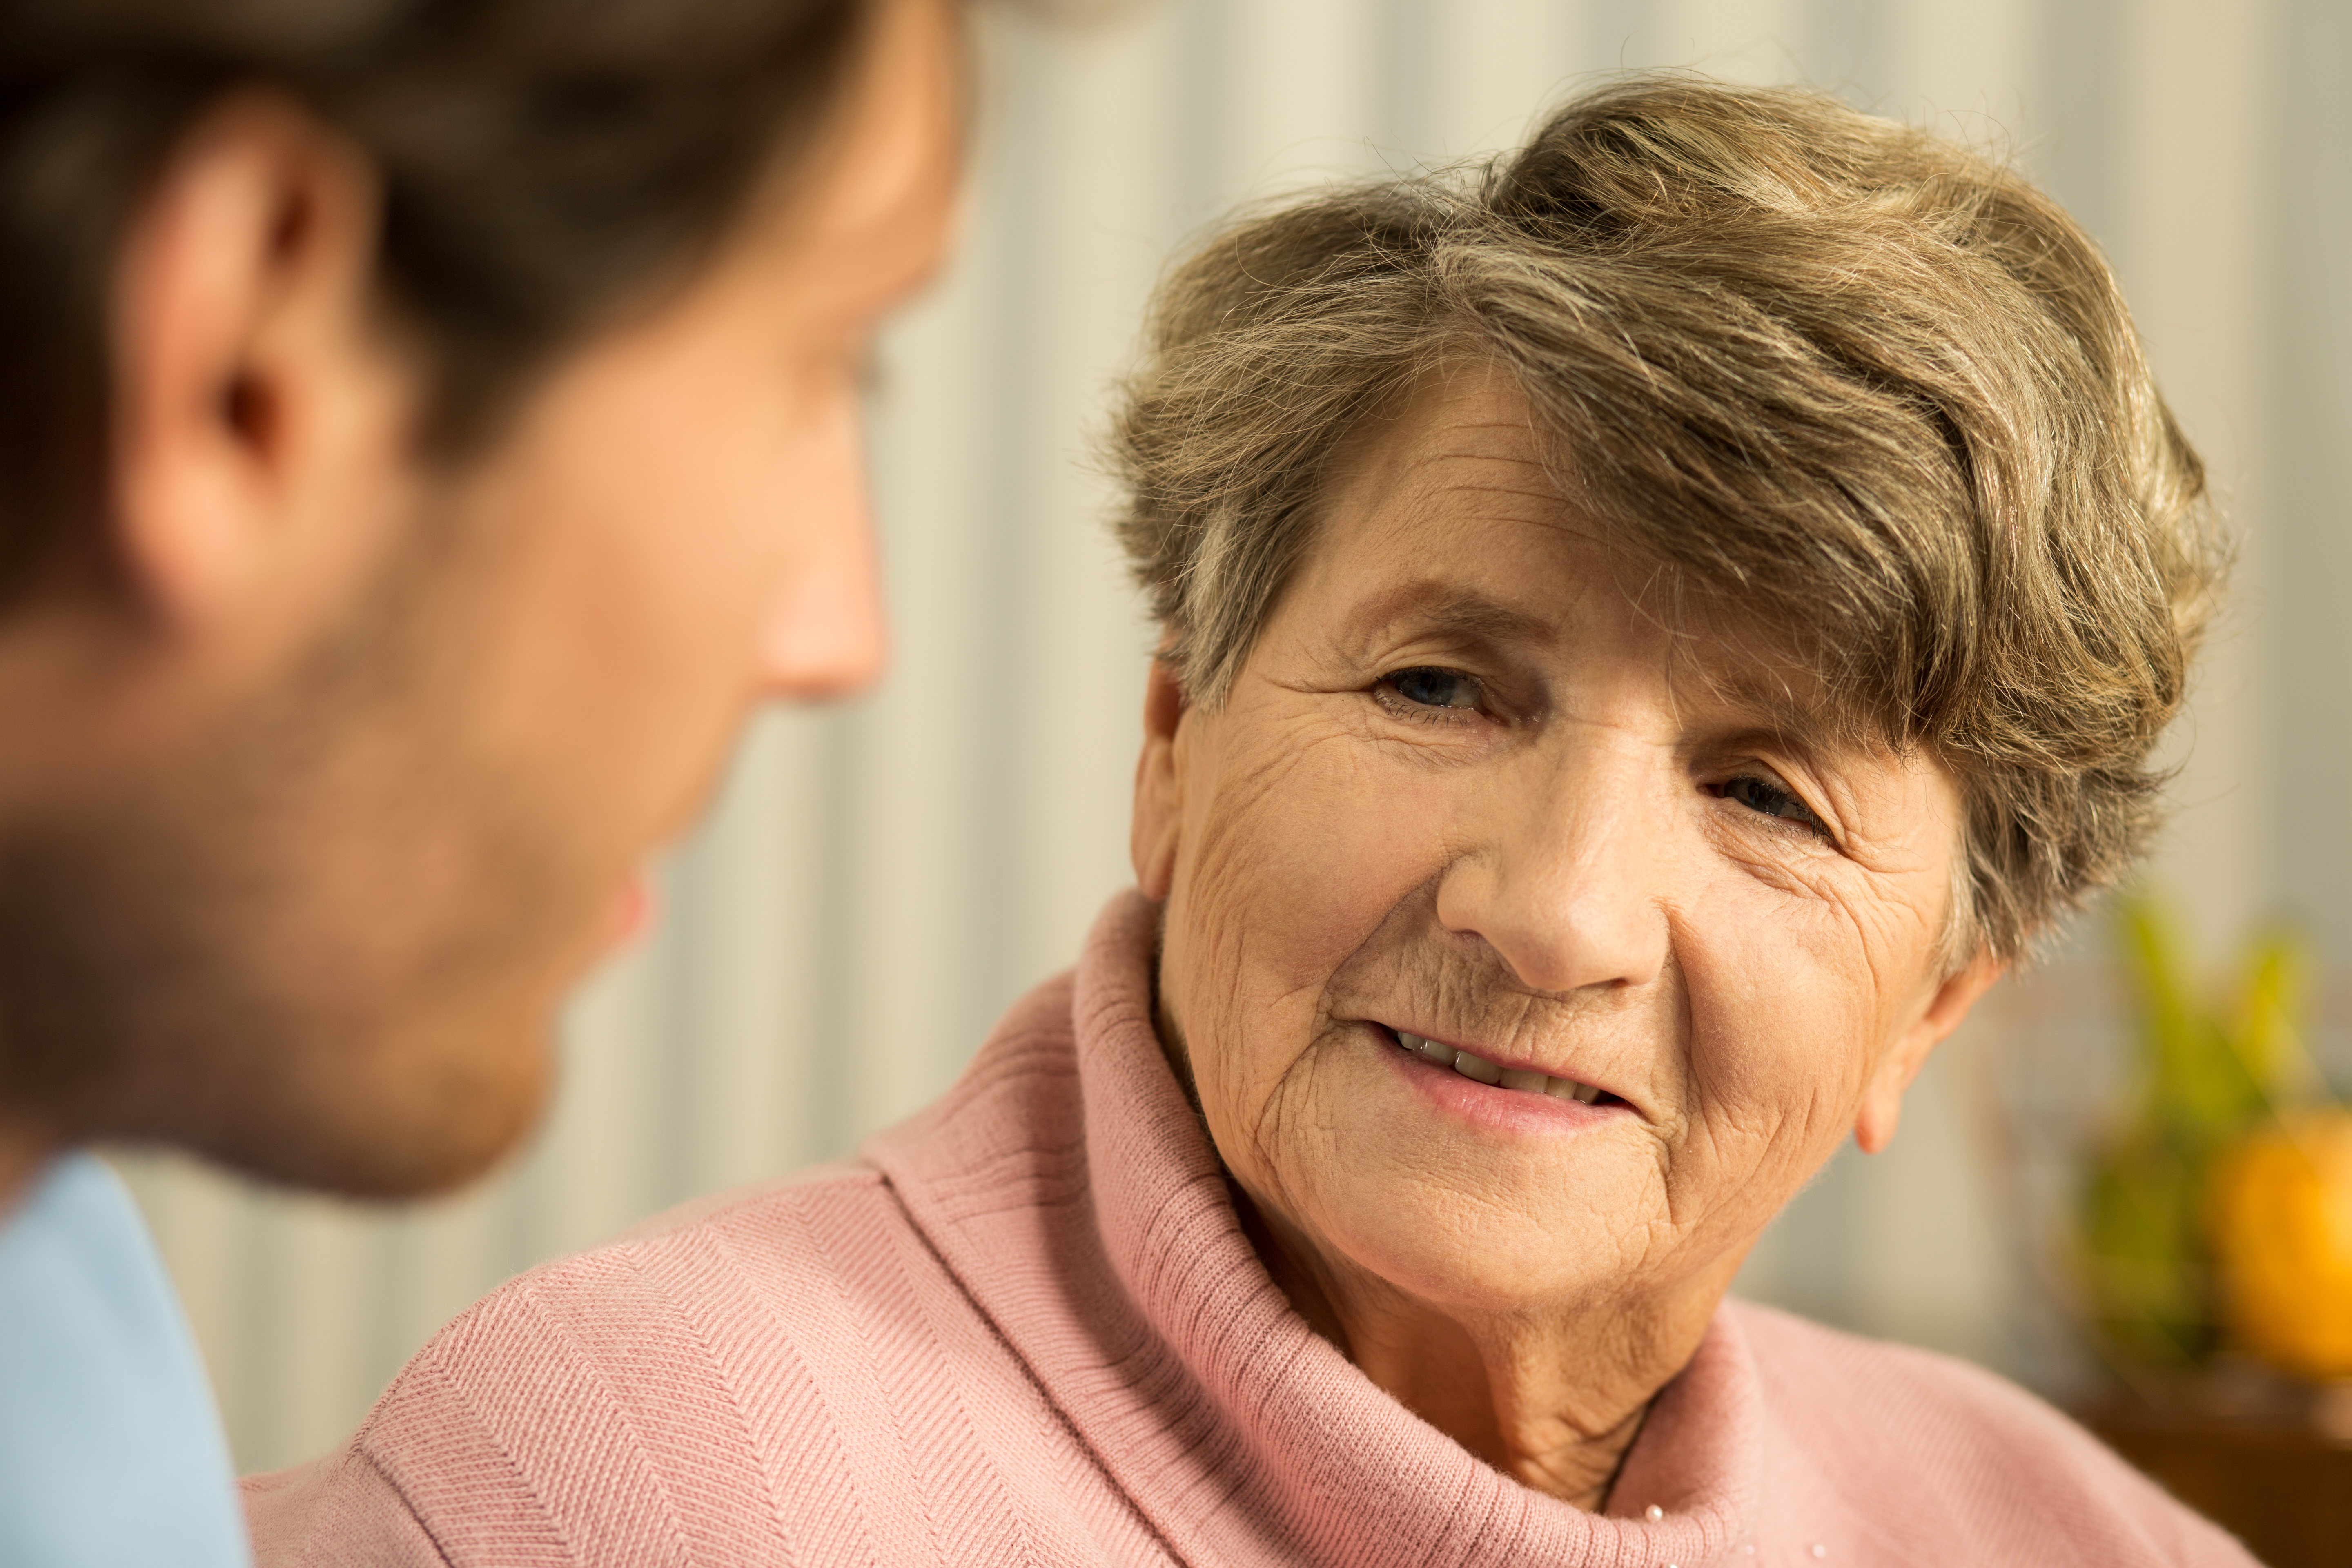 A  senior woman talking with a young man | Source: Shutterstock